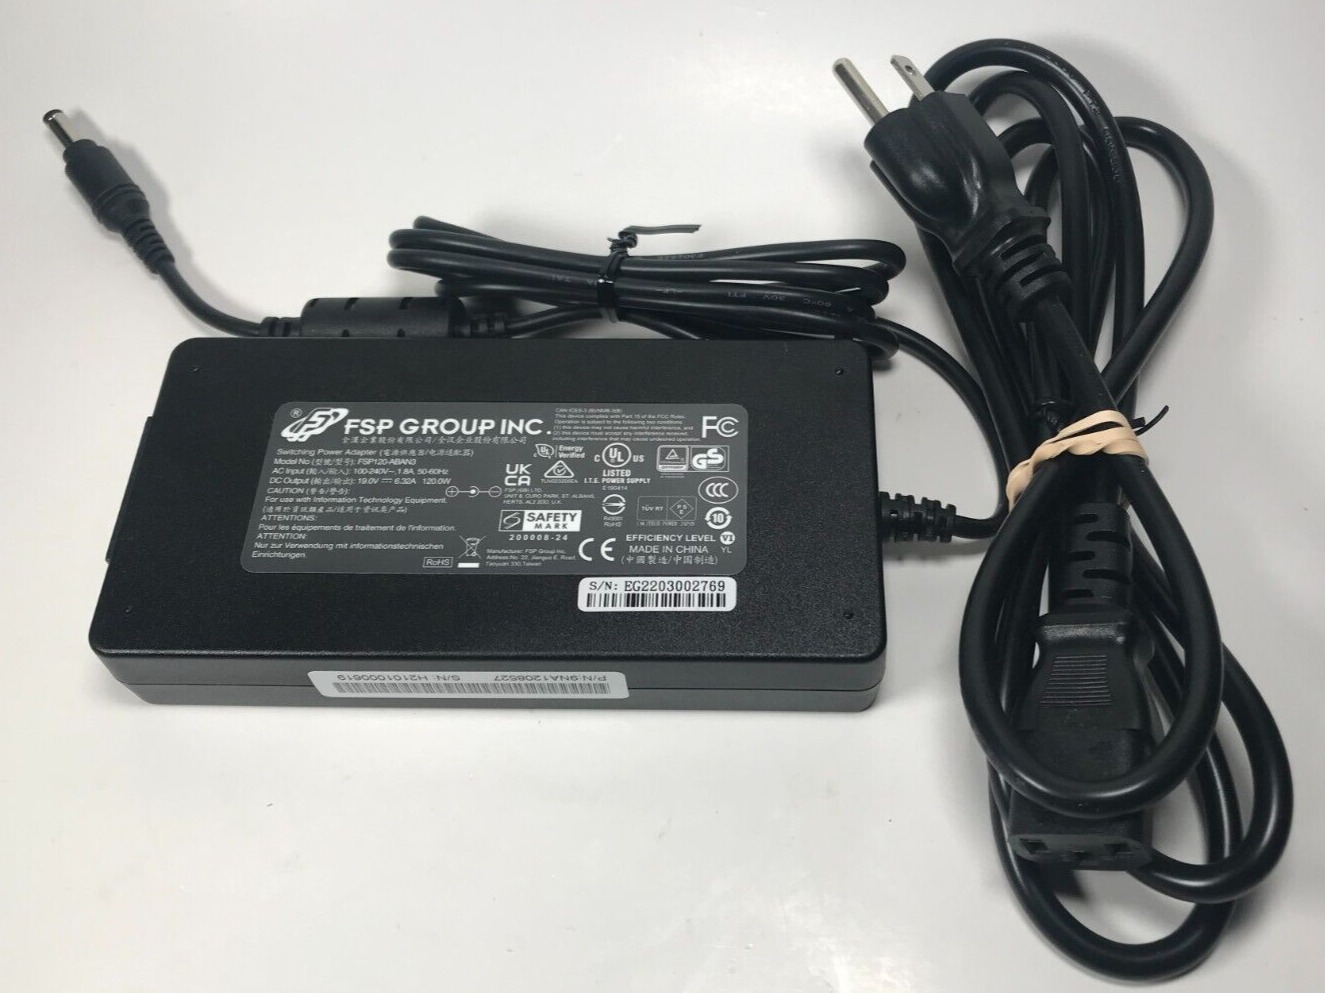 FSP Group FSP120-ABAN3 19V 6.32A Switching Power Supply Adapter with Cord